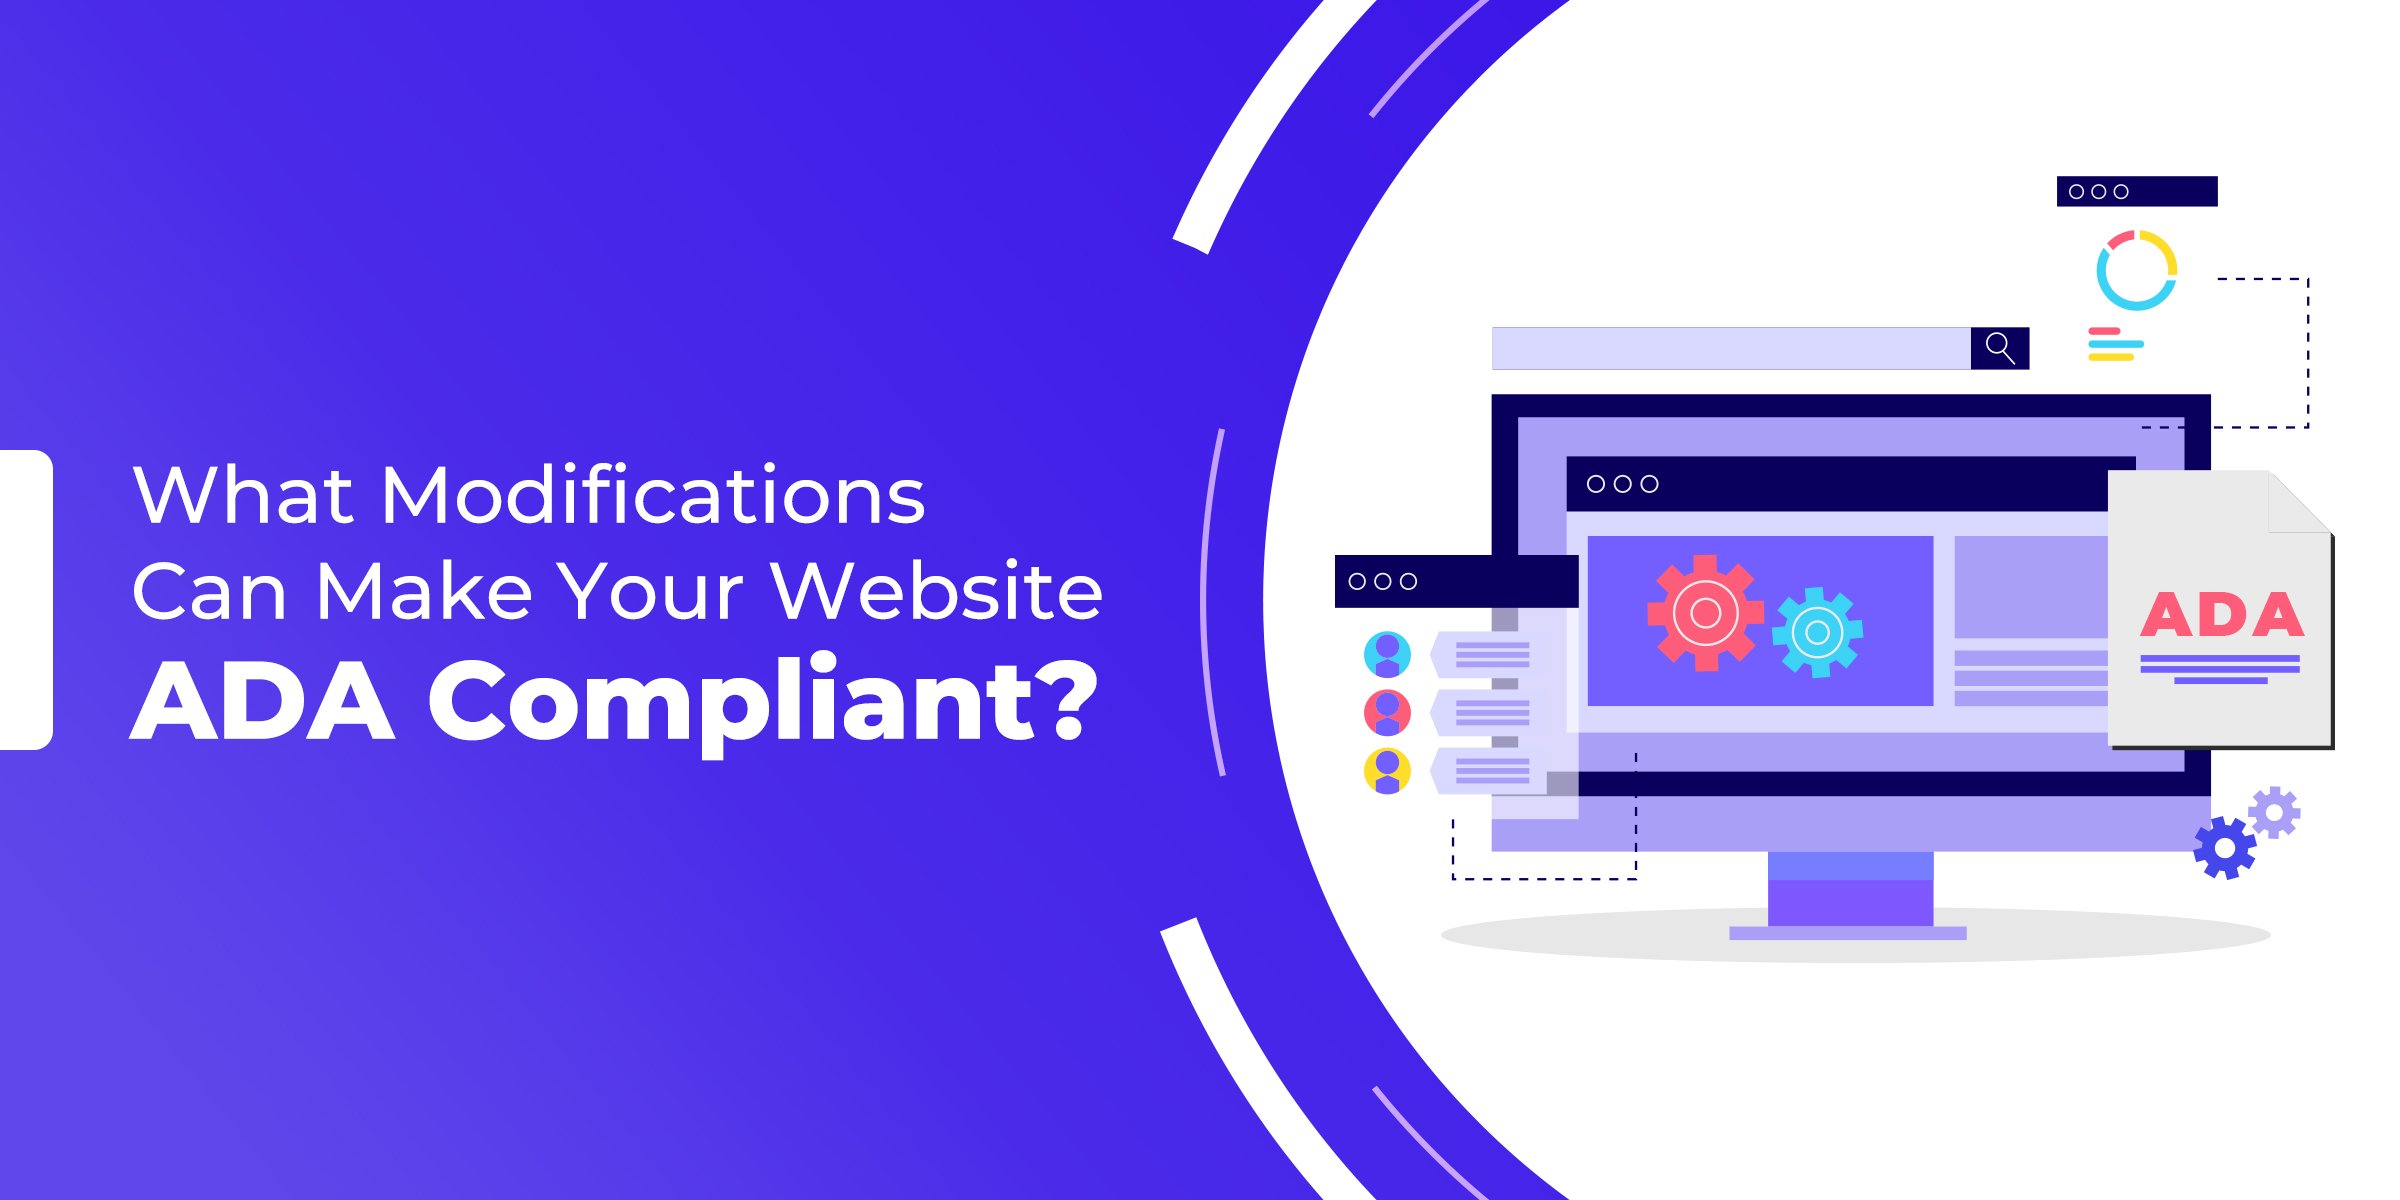 What Modifications Can Make Your Website ADA Compliant?